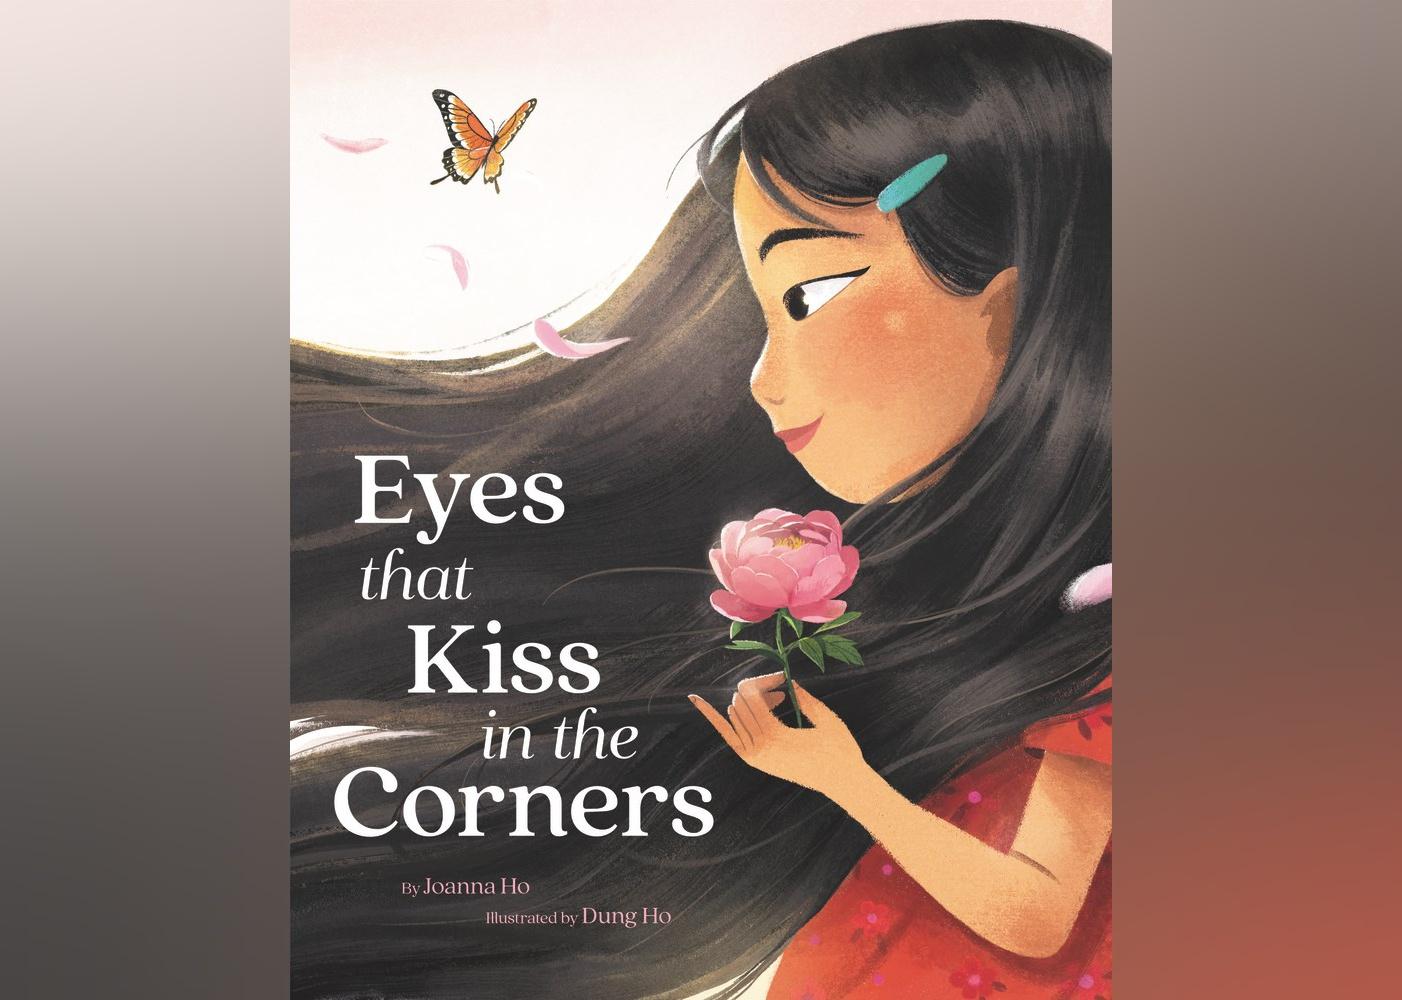 The cover of "Eyes That Kiss in the Corners" features a young Asian girl holding a pink flower with a butterfly flying near her.